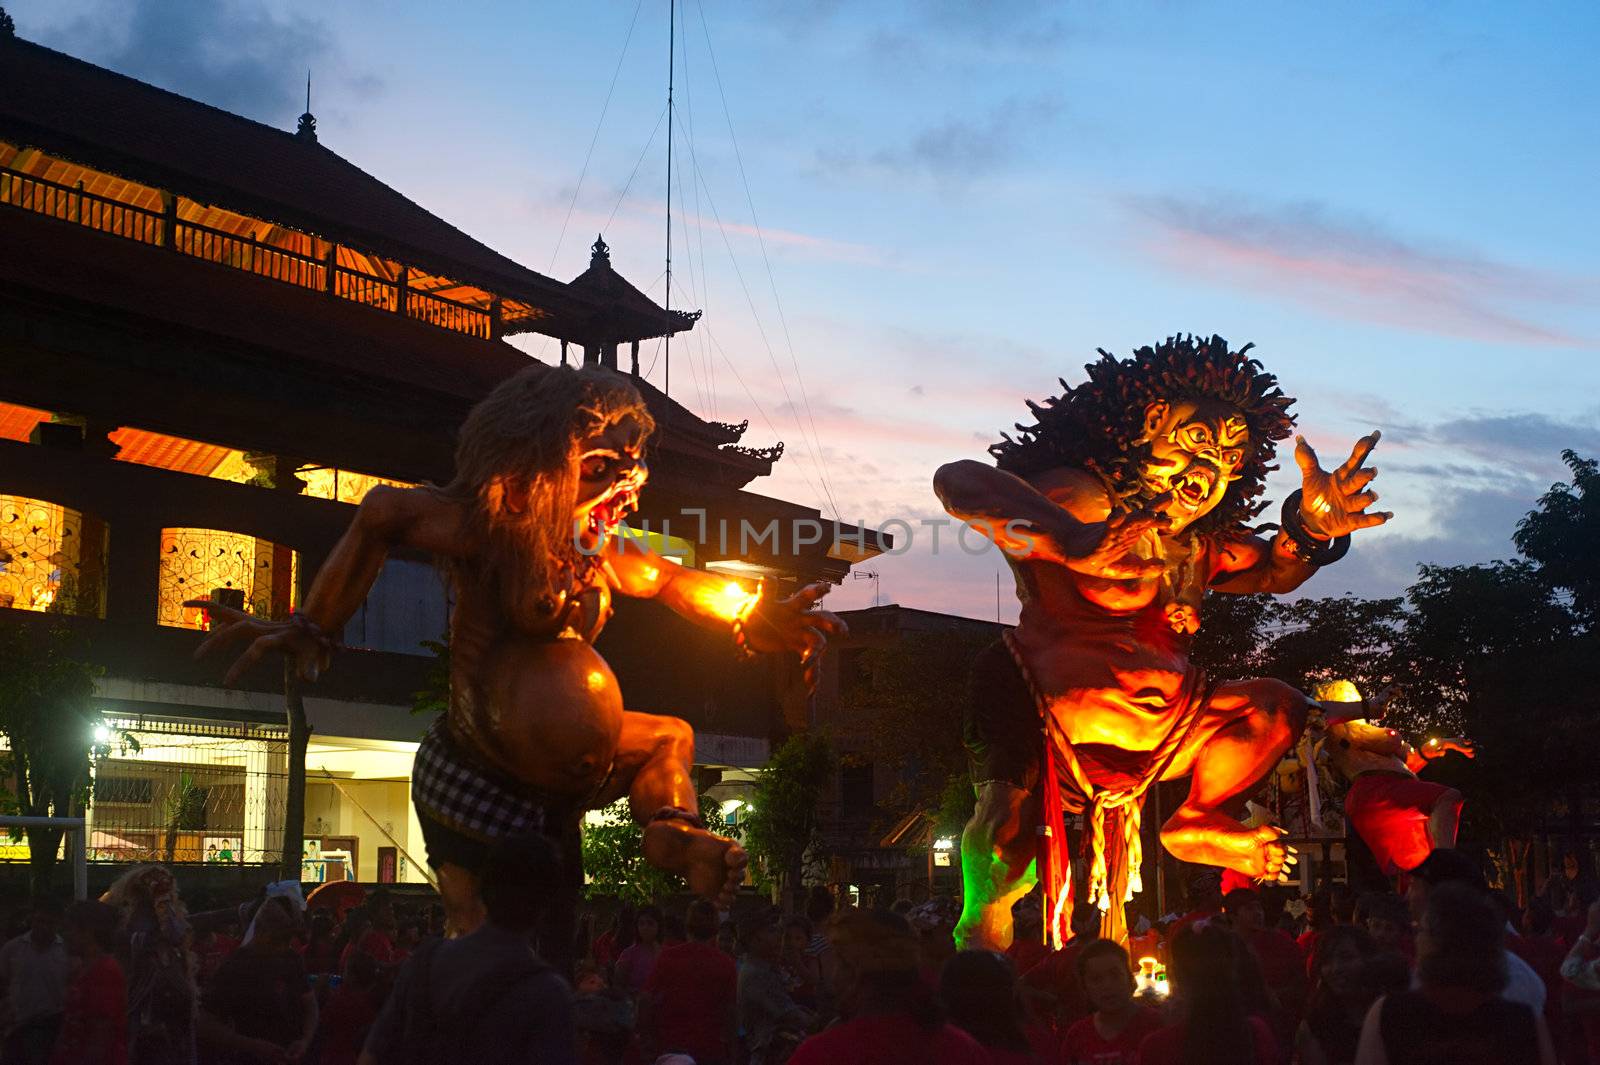 Ubud, Bali, Indonesia - March 12, 2013: Balinese statue Ogoh-Ogoh during the celebration of Nyepi - Balinese Day of Silence. The day following Nyepi is also celebrated as New year.